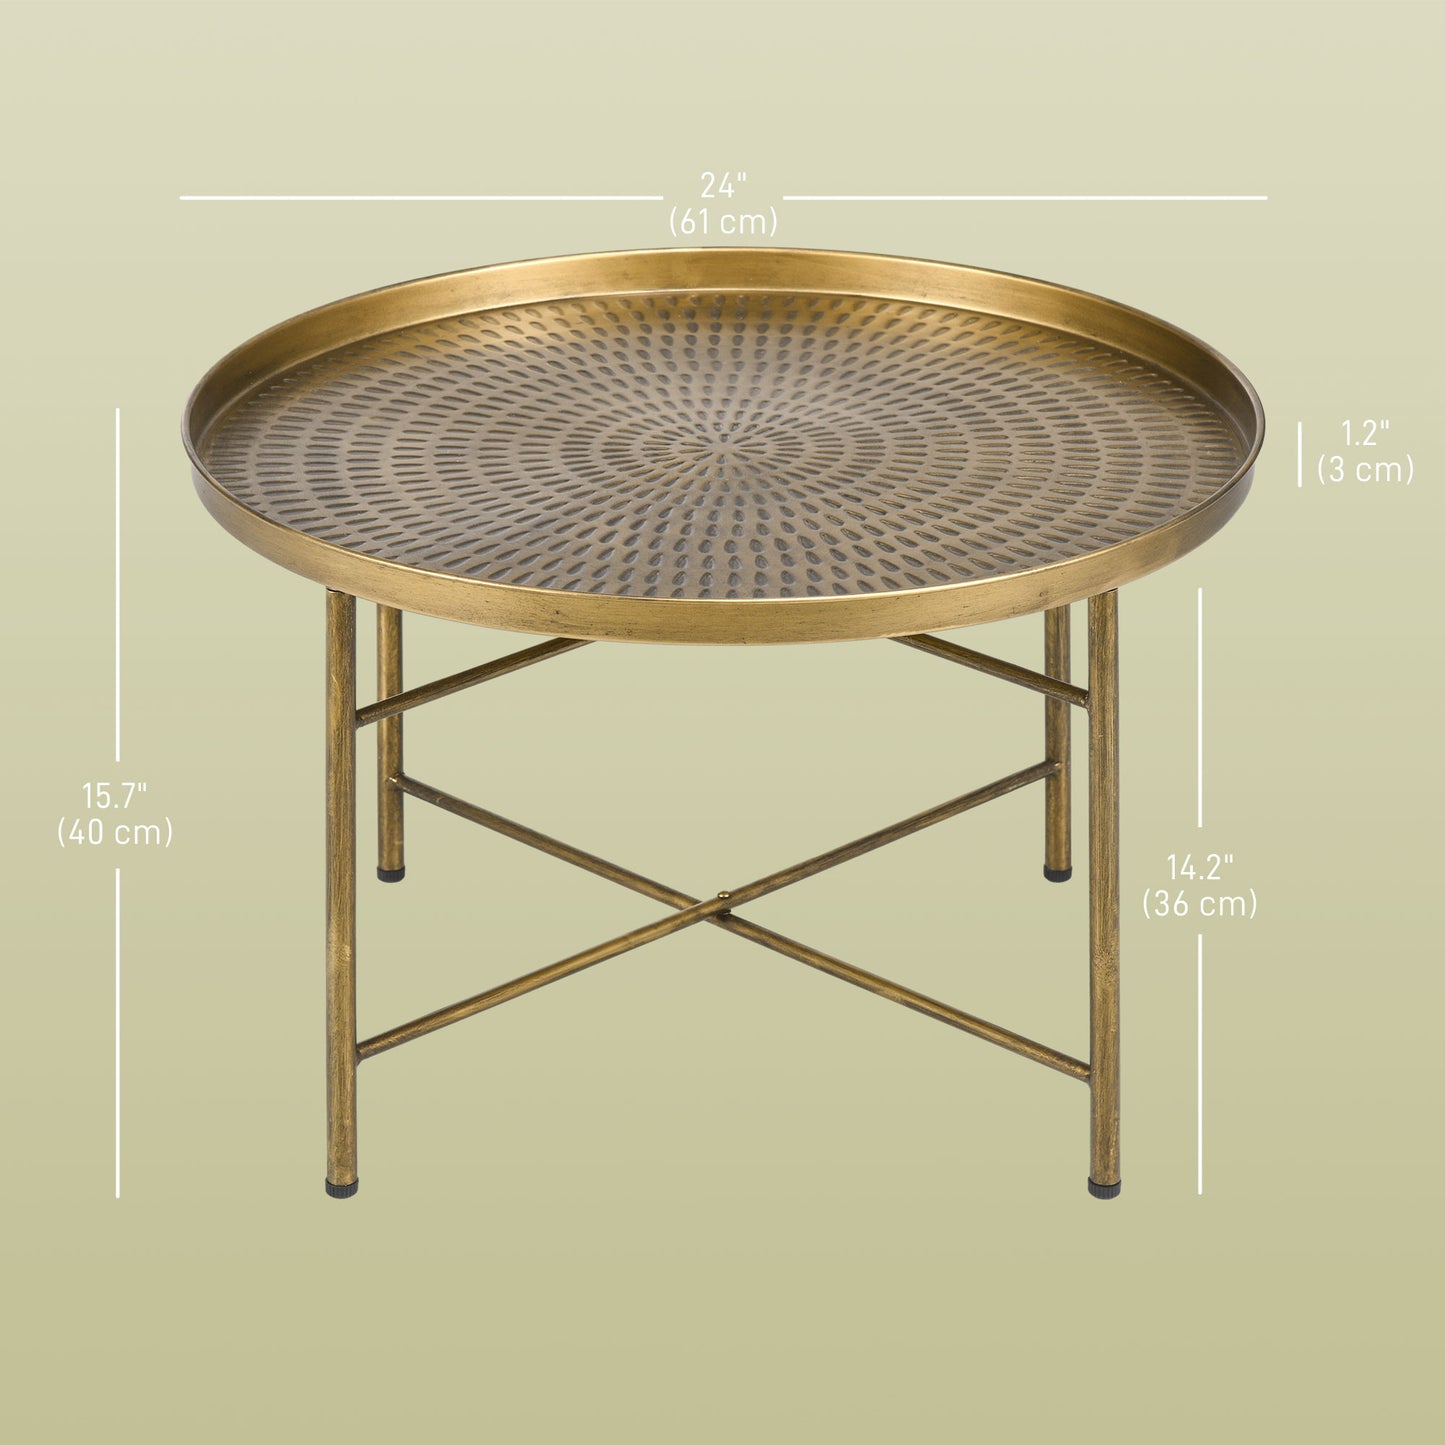 Vintage Coffee Table for Living Room, 24" Round Center Table with Hammered Tray Top and Metal Frame, Gold at Gallery Canada